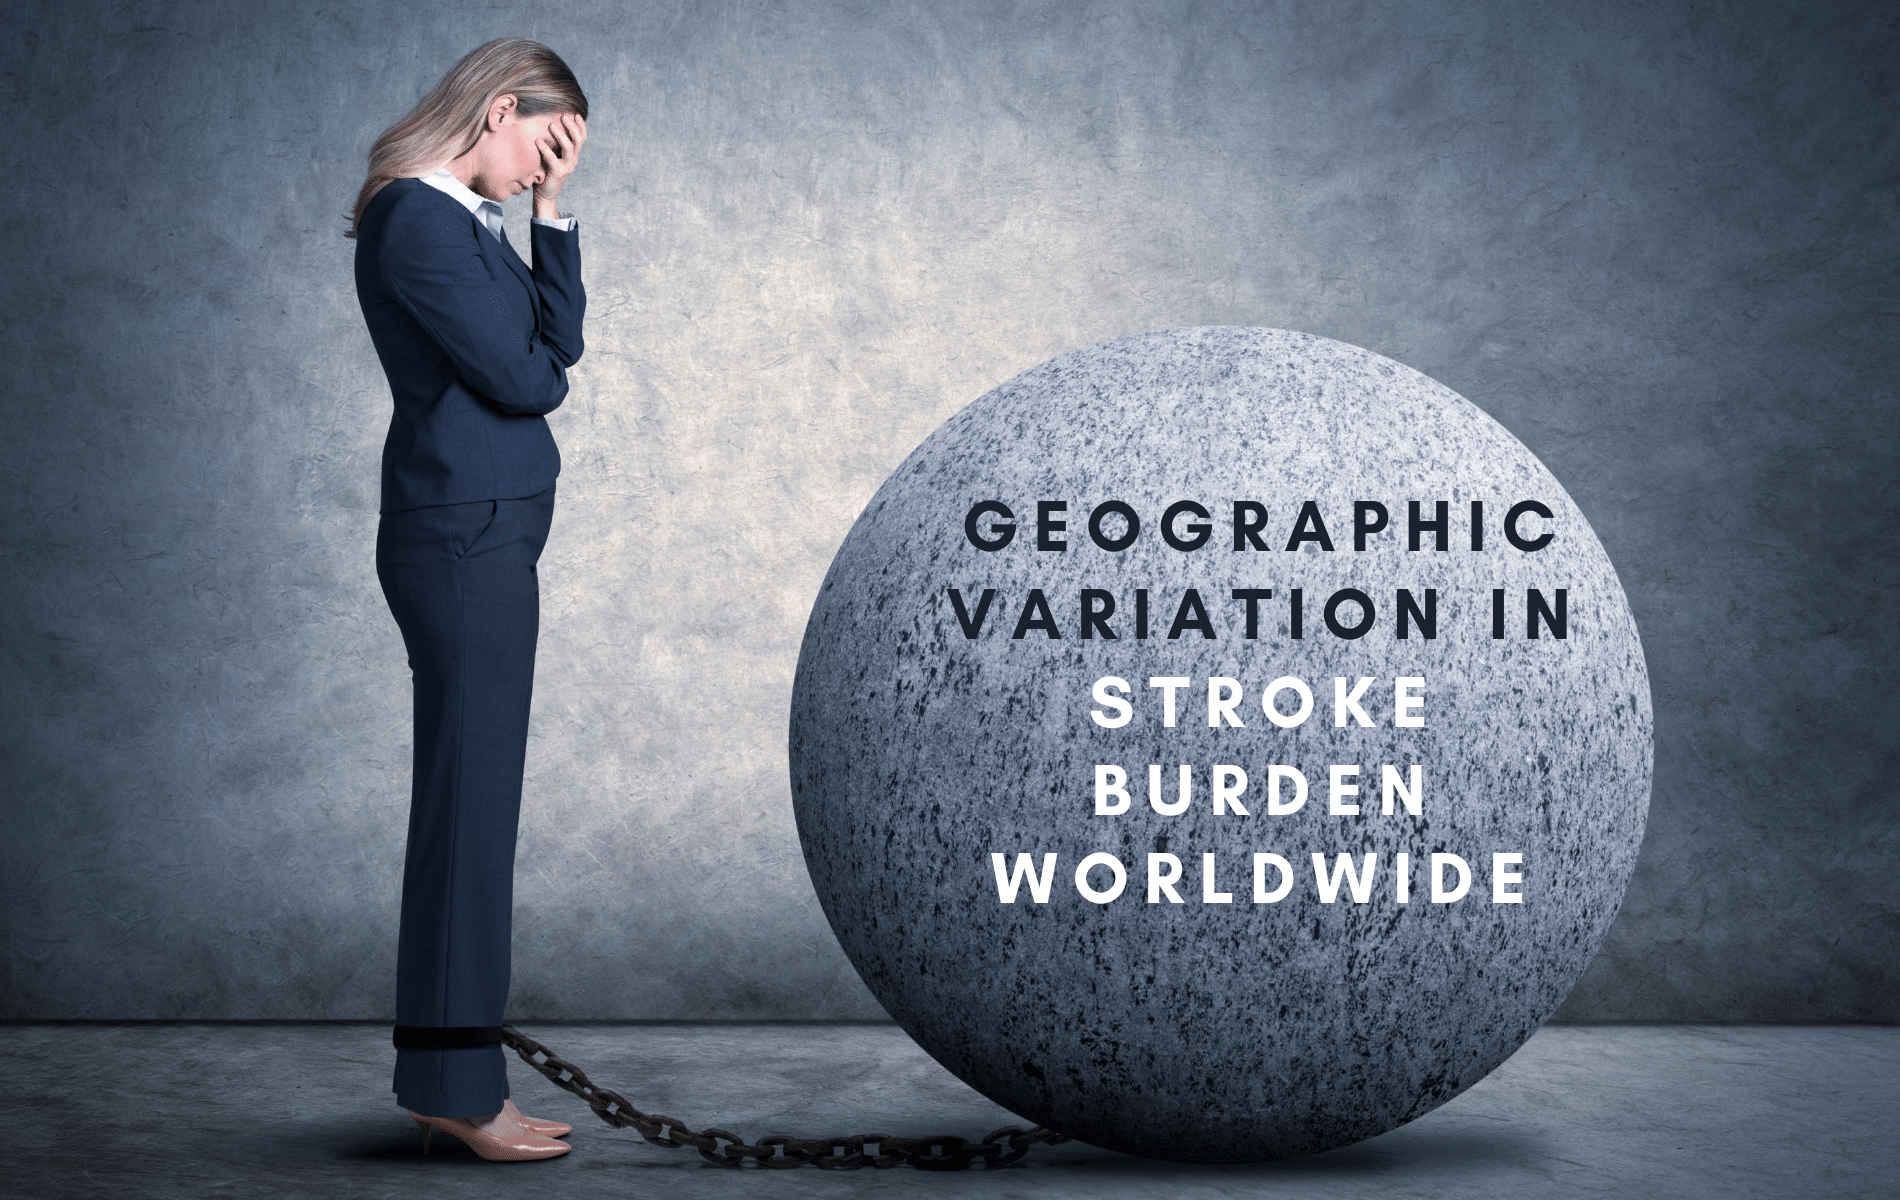 Is there any geographic variation in stroke burden worldwide?